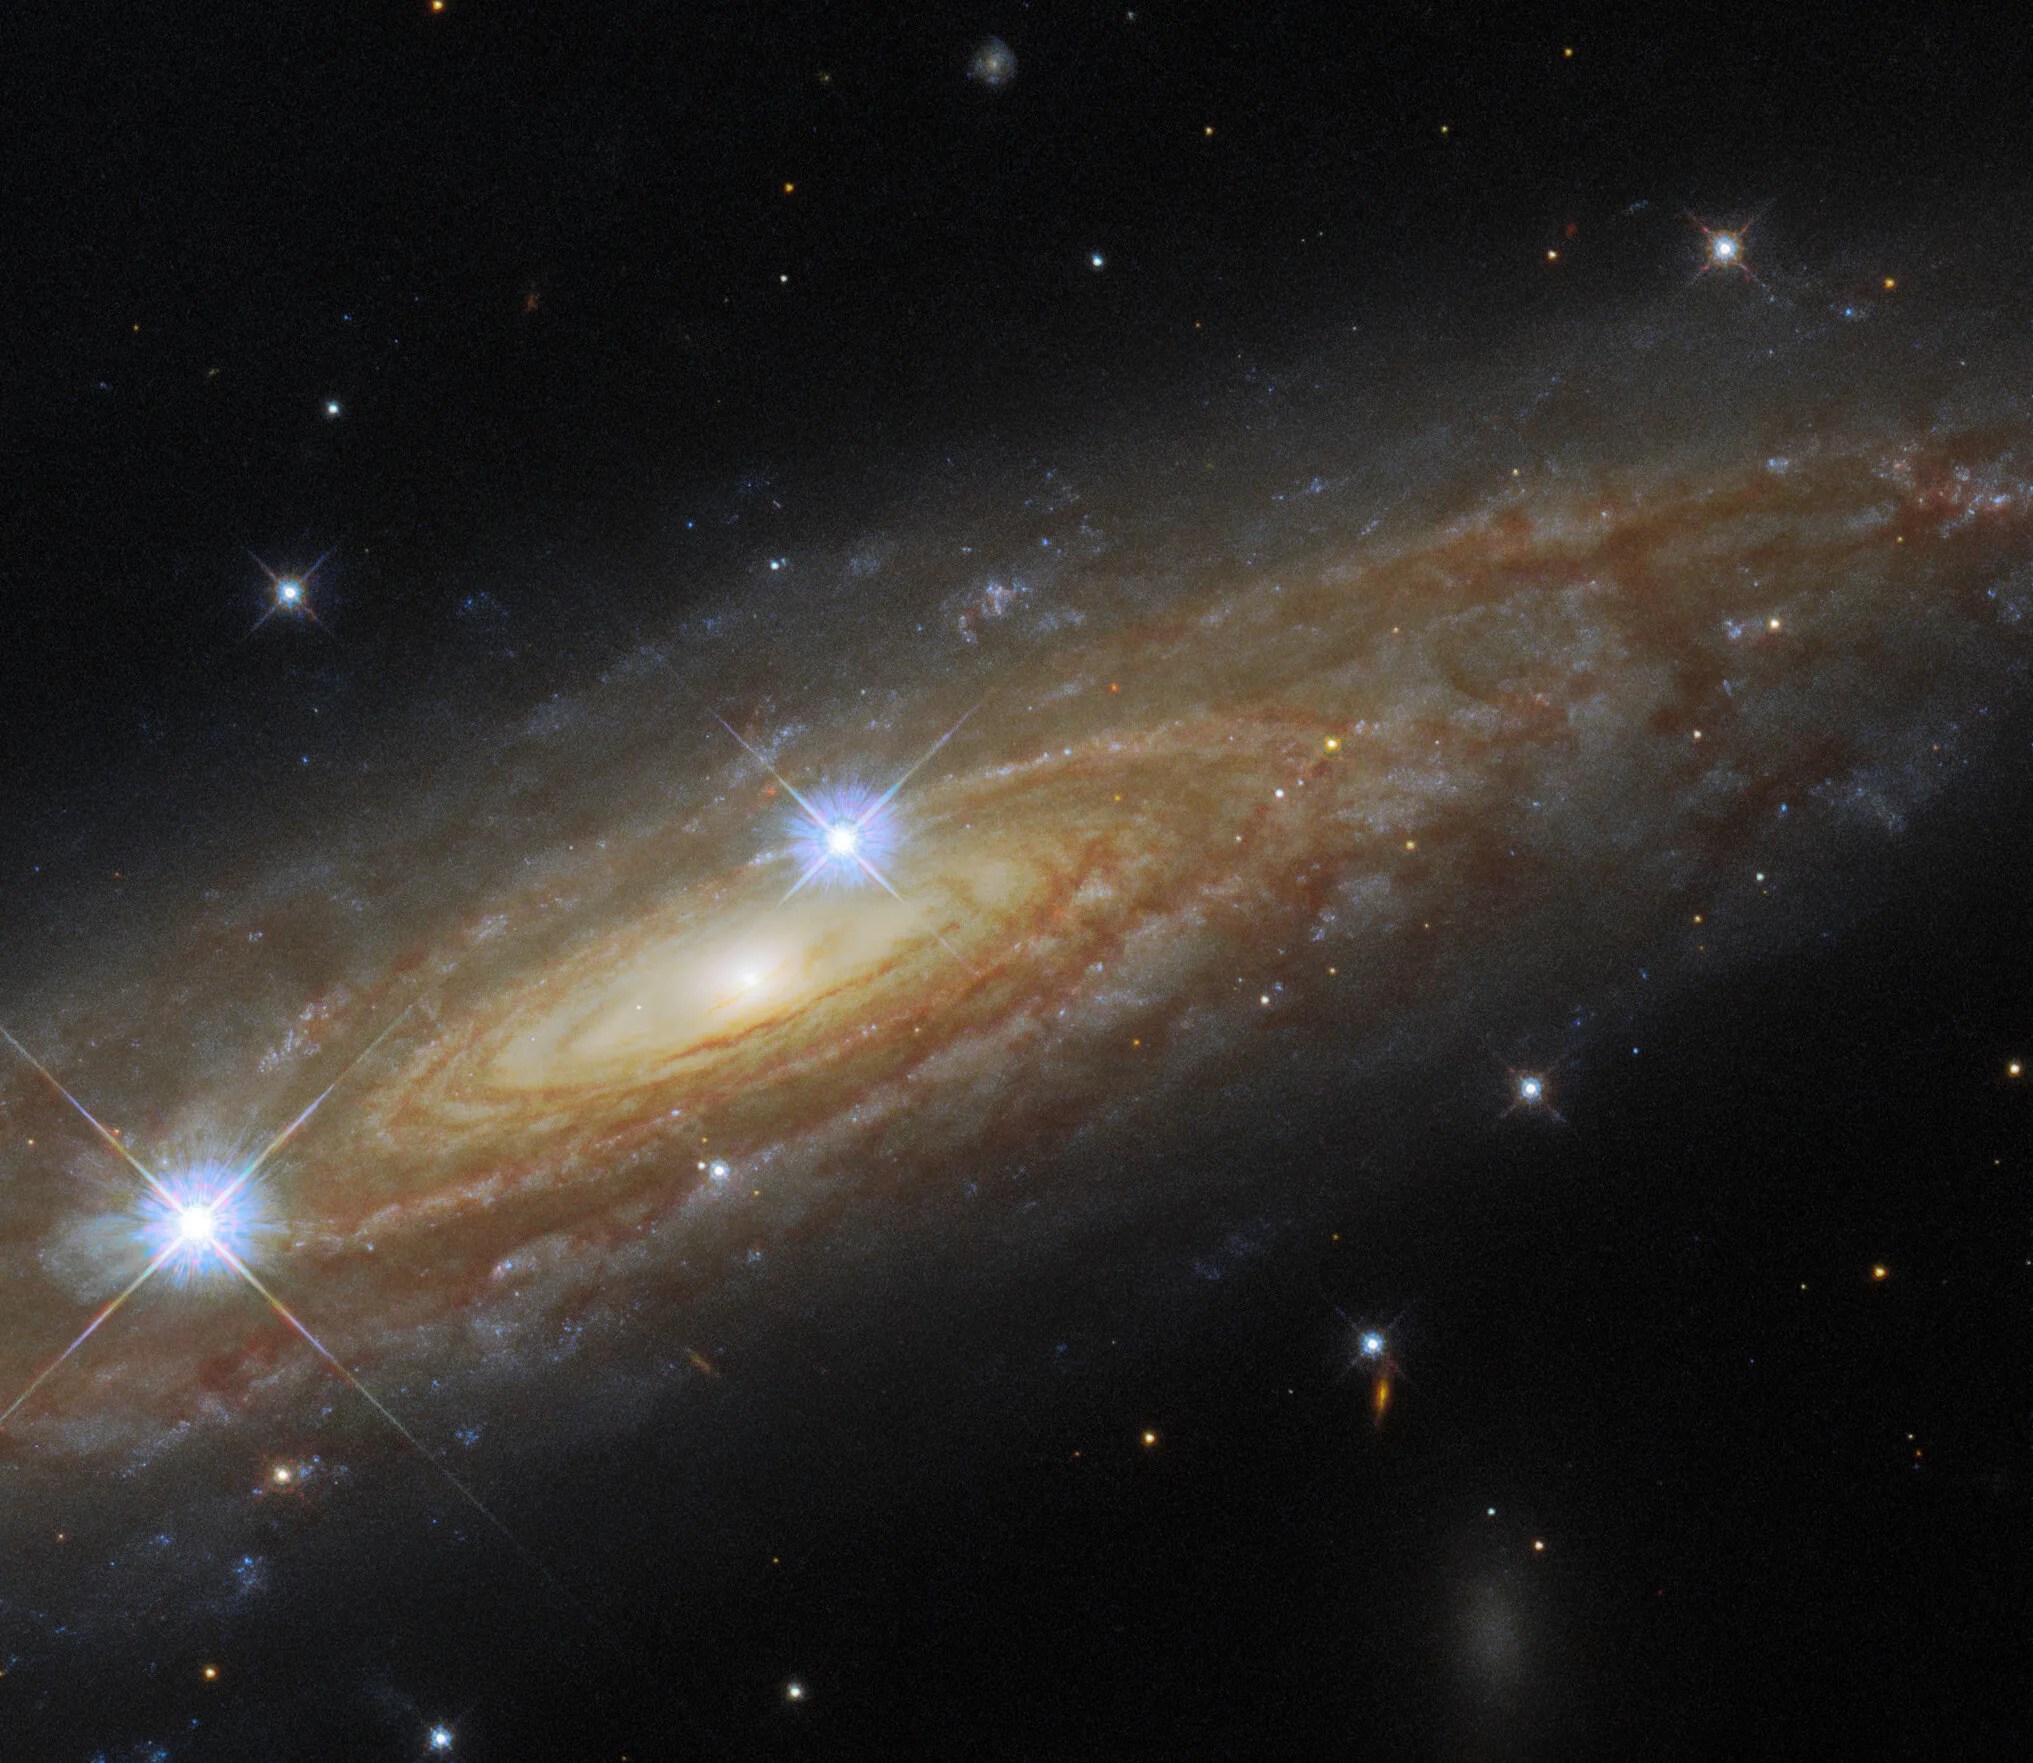 Spiral galaxy stretches from lower left to upper right of the image. two bright foreground stars are also in the image.